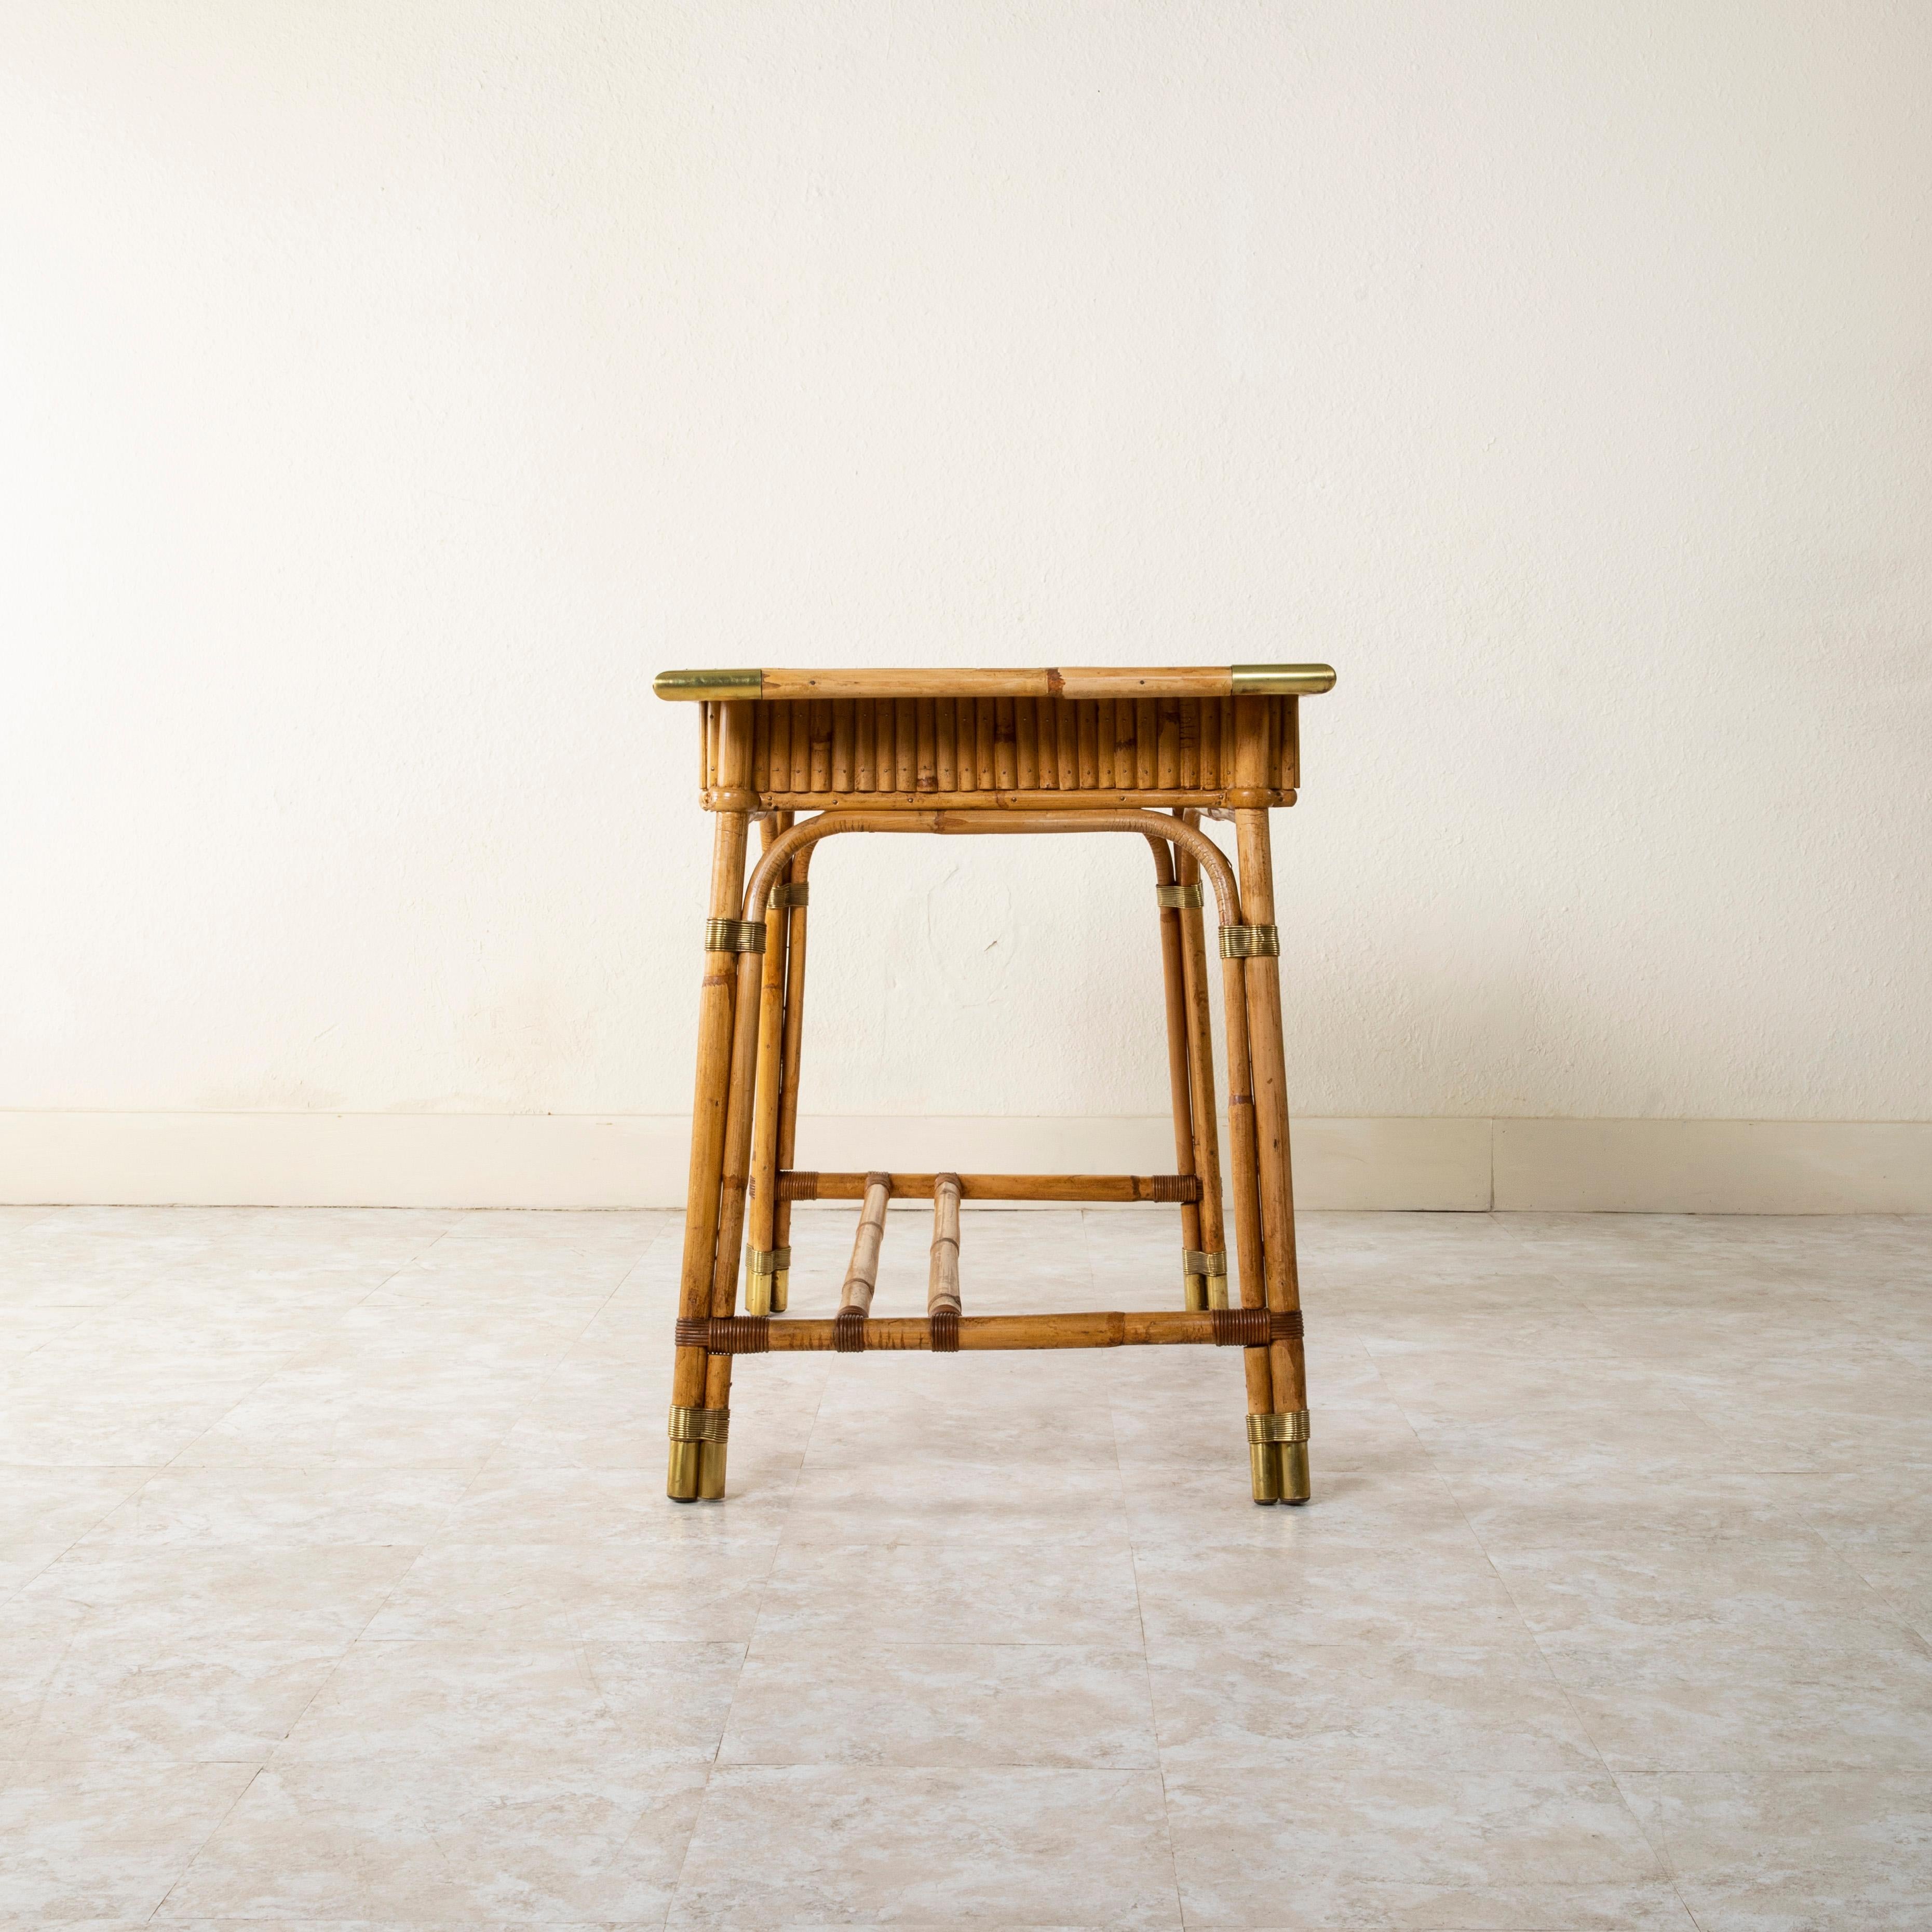 20th Century French Maison Jansen Bamboo Writing Desk and Chair, Louis Sognot For Sale 2